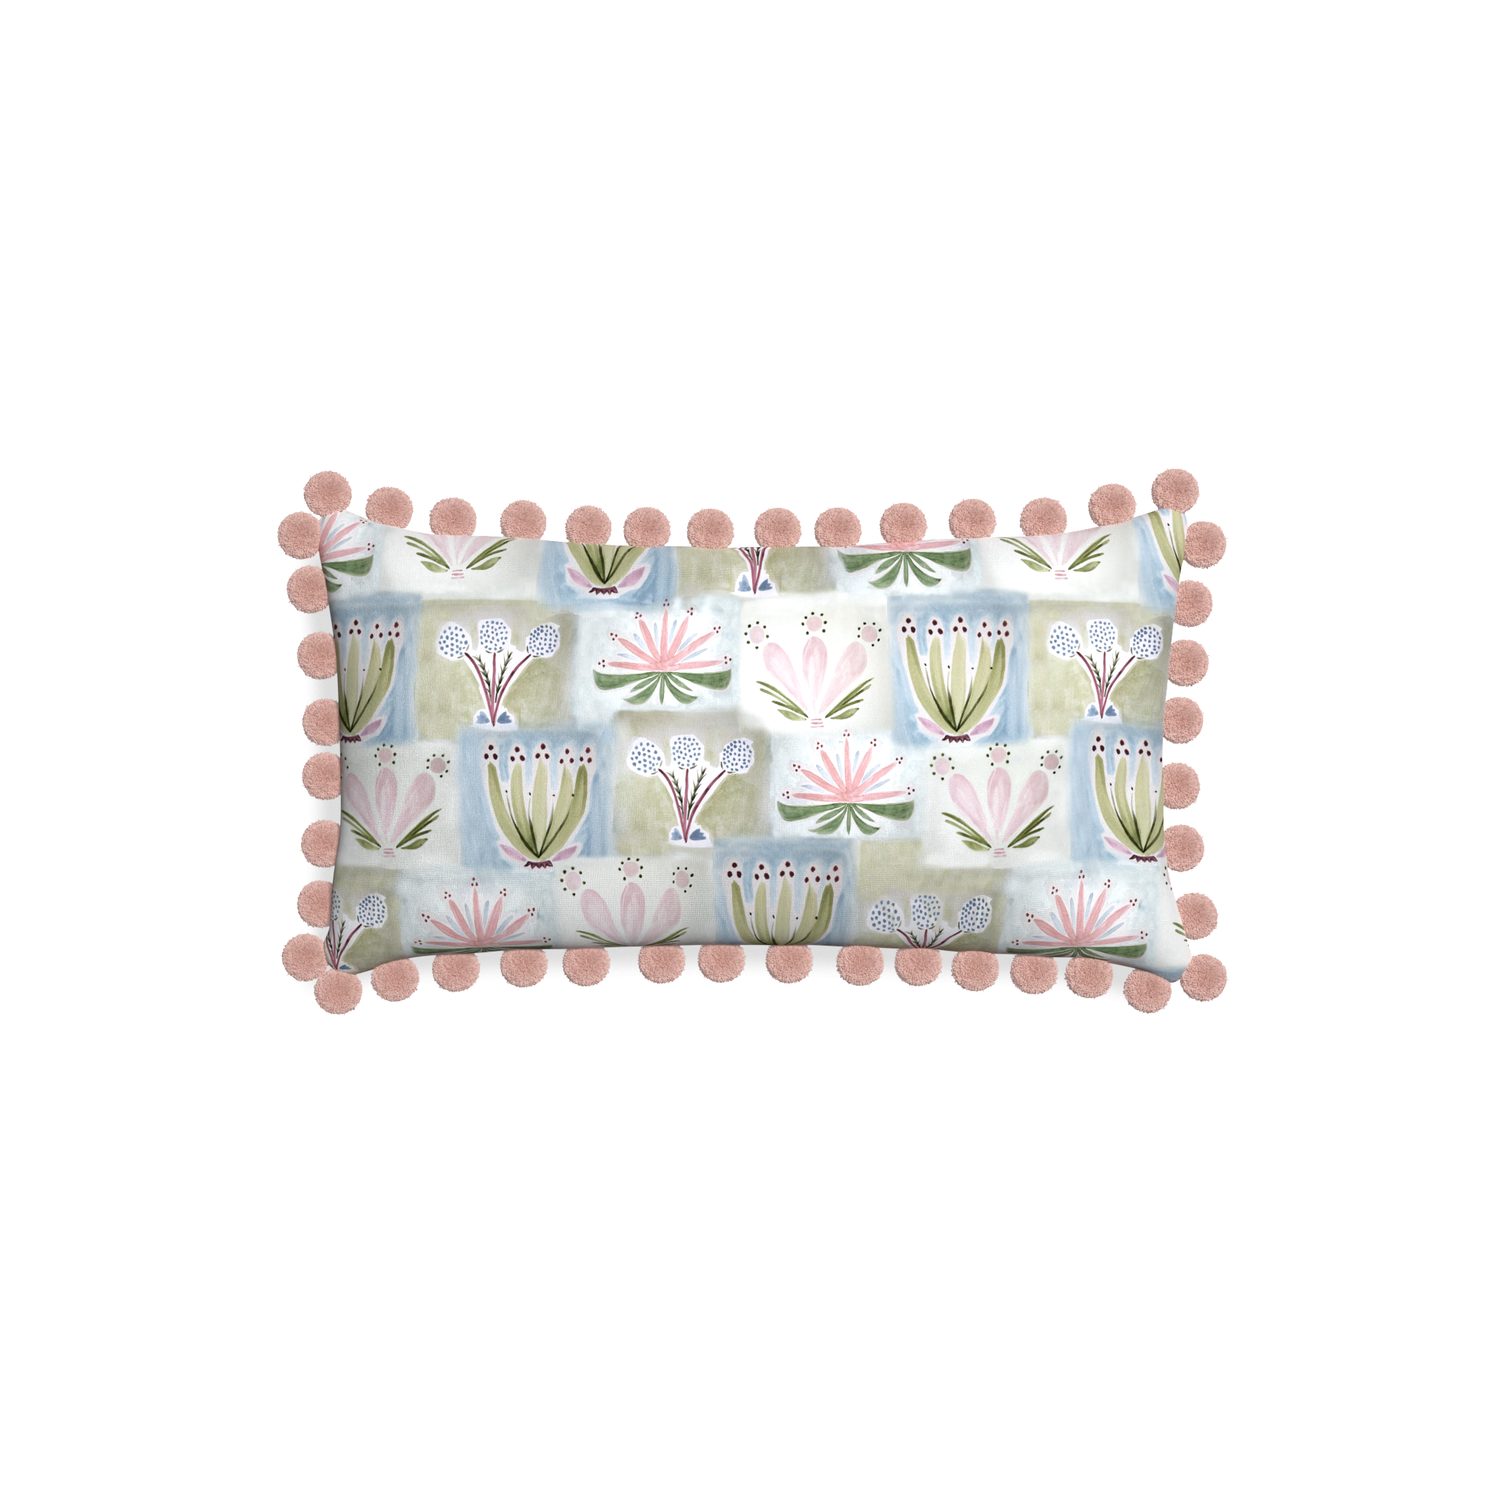 Petite-lumbar harper custom hand-painted floralpillow with rose pom pom on white background